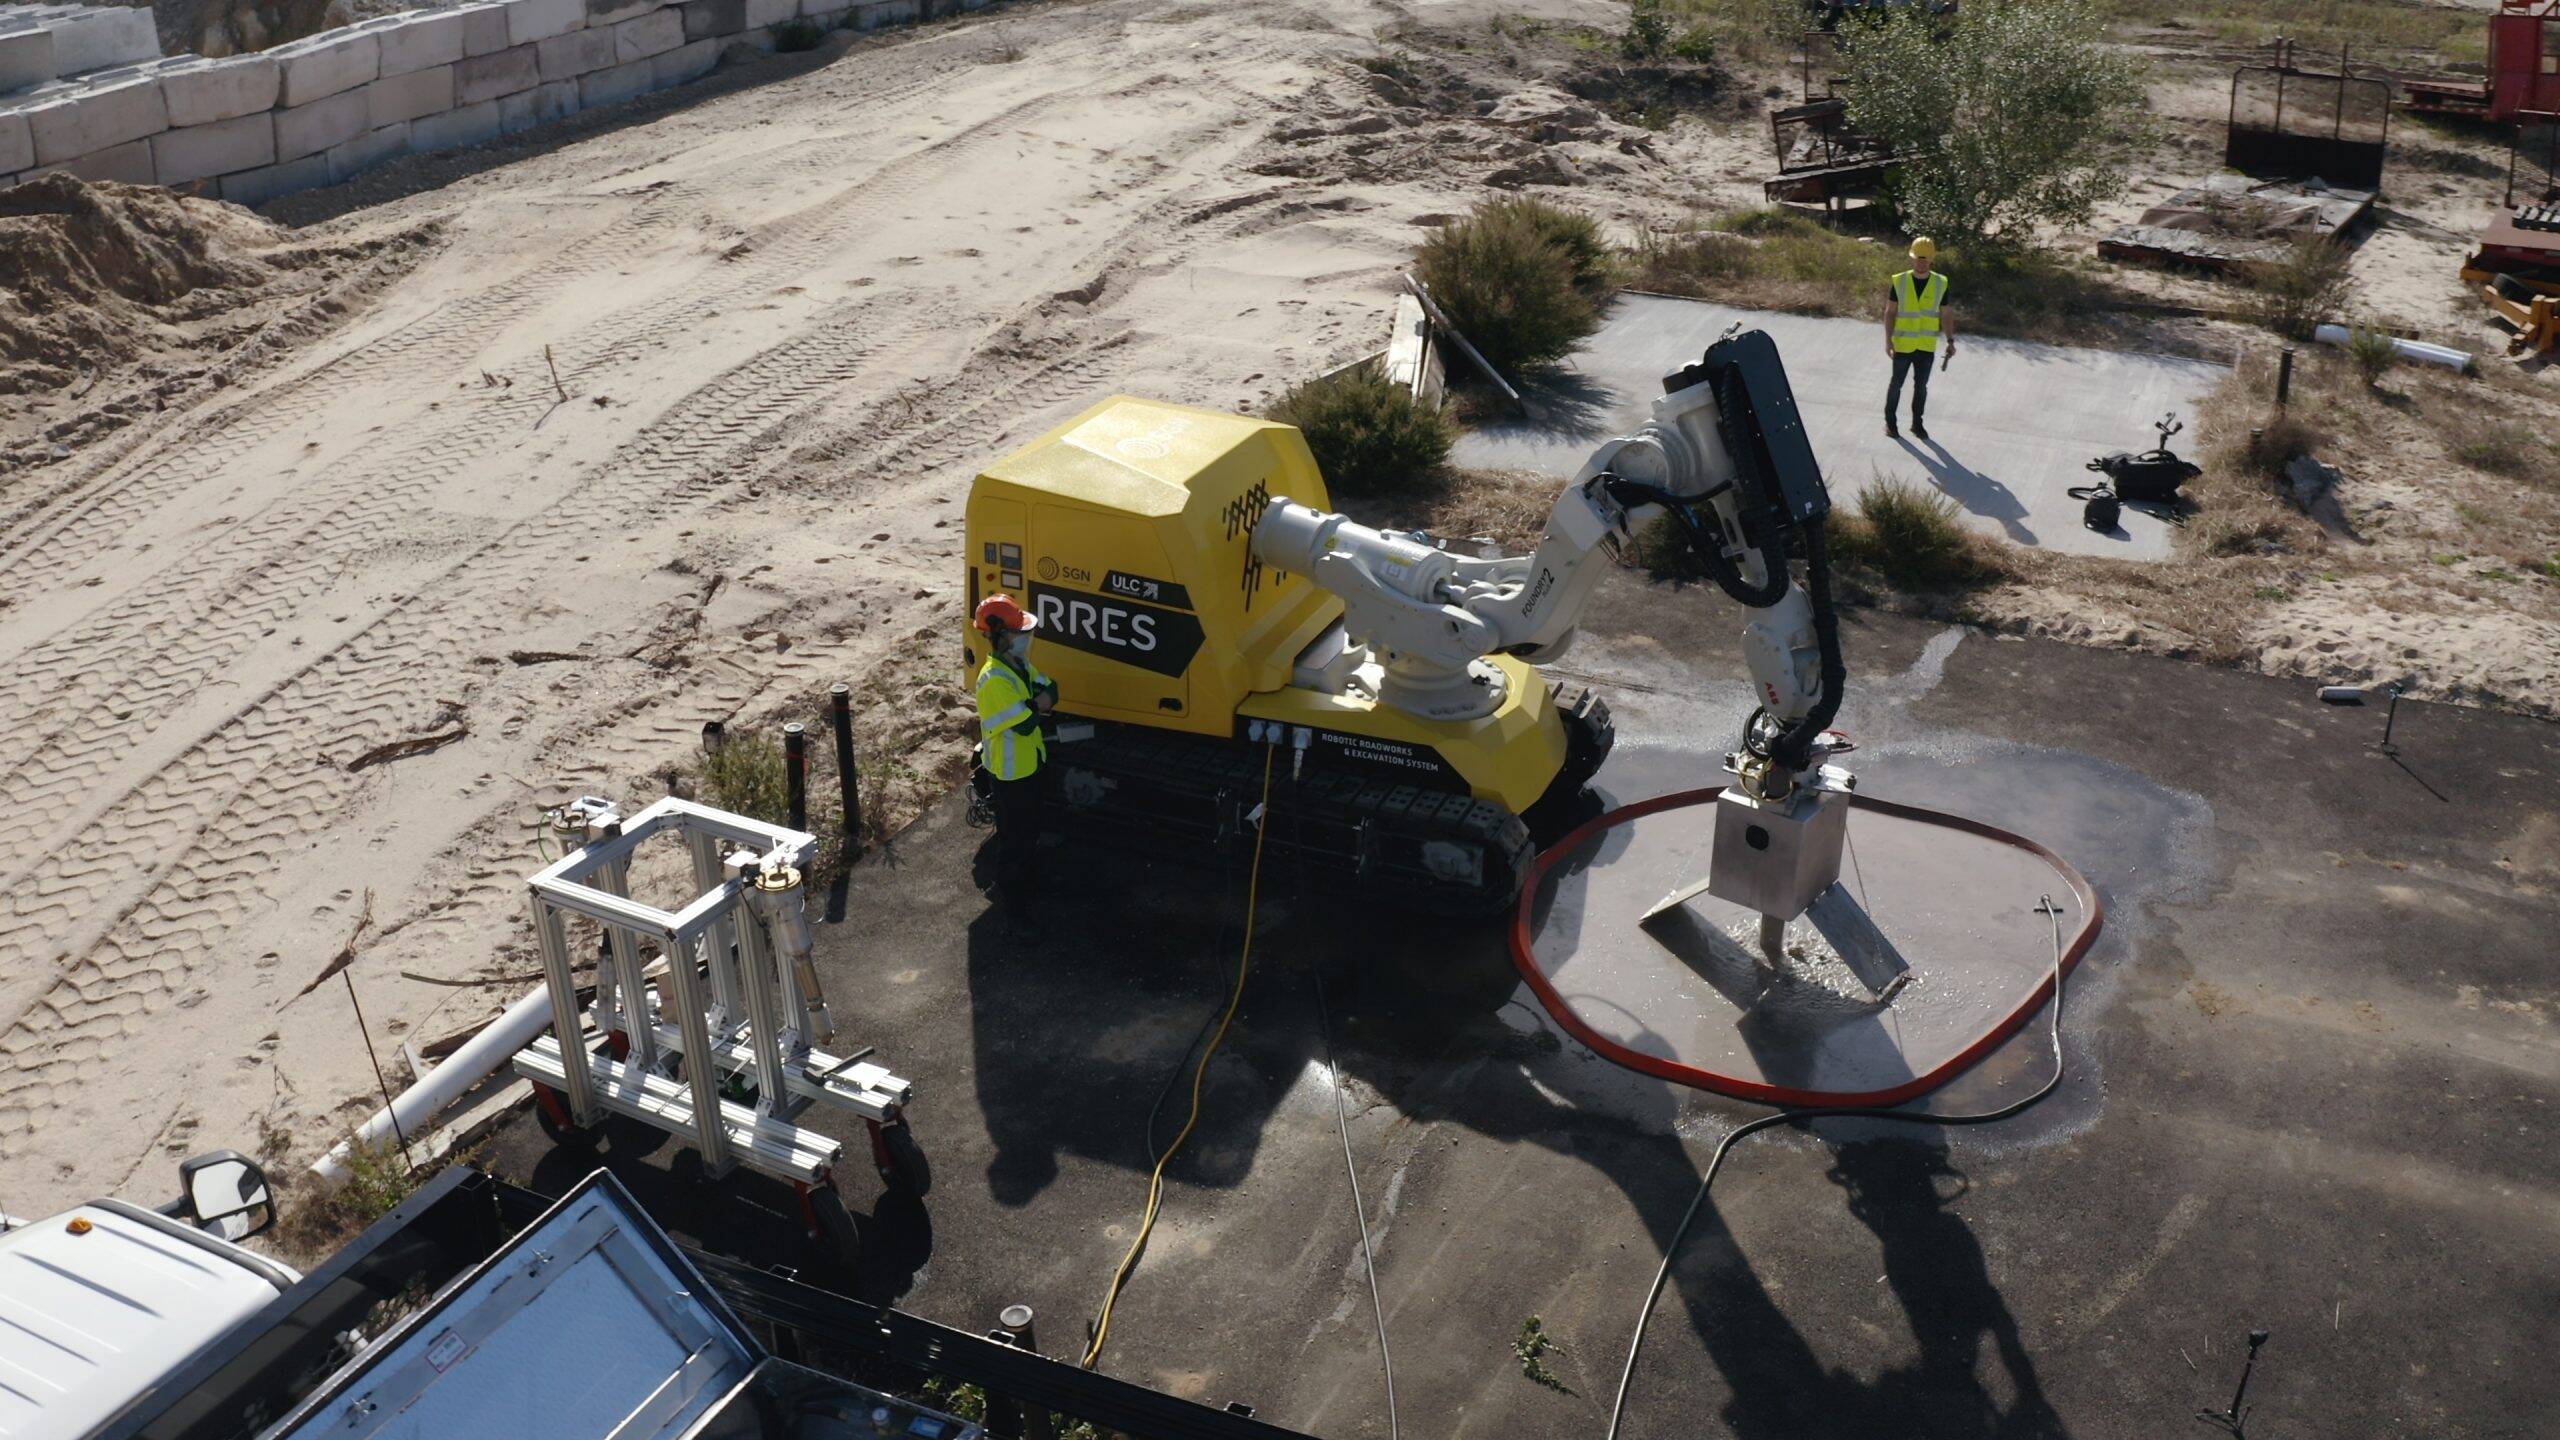 In pictures: chainsaw-wielding roadworks robot set for trial